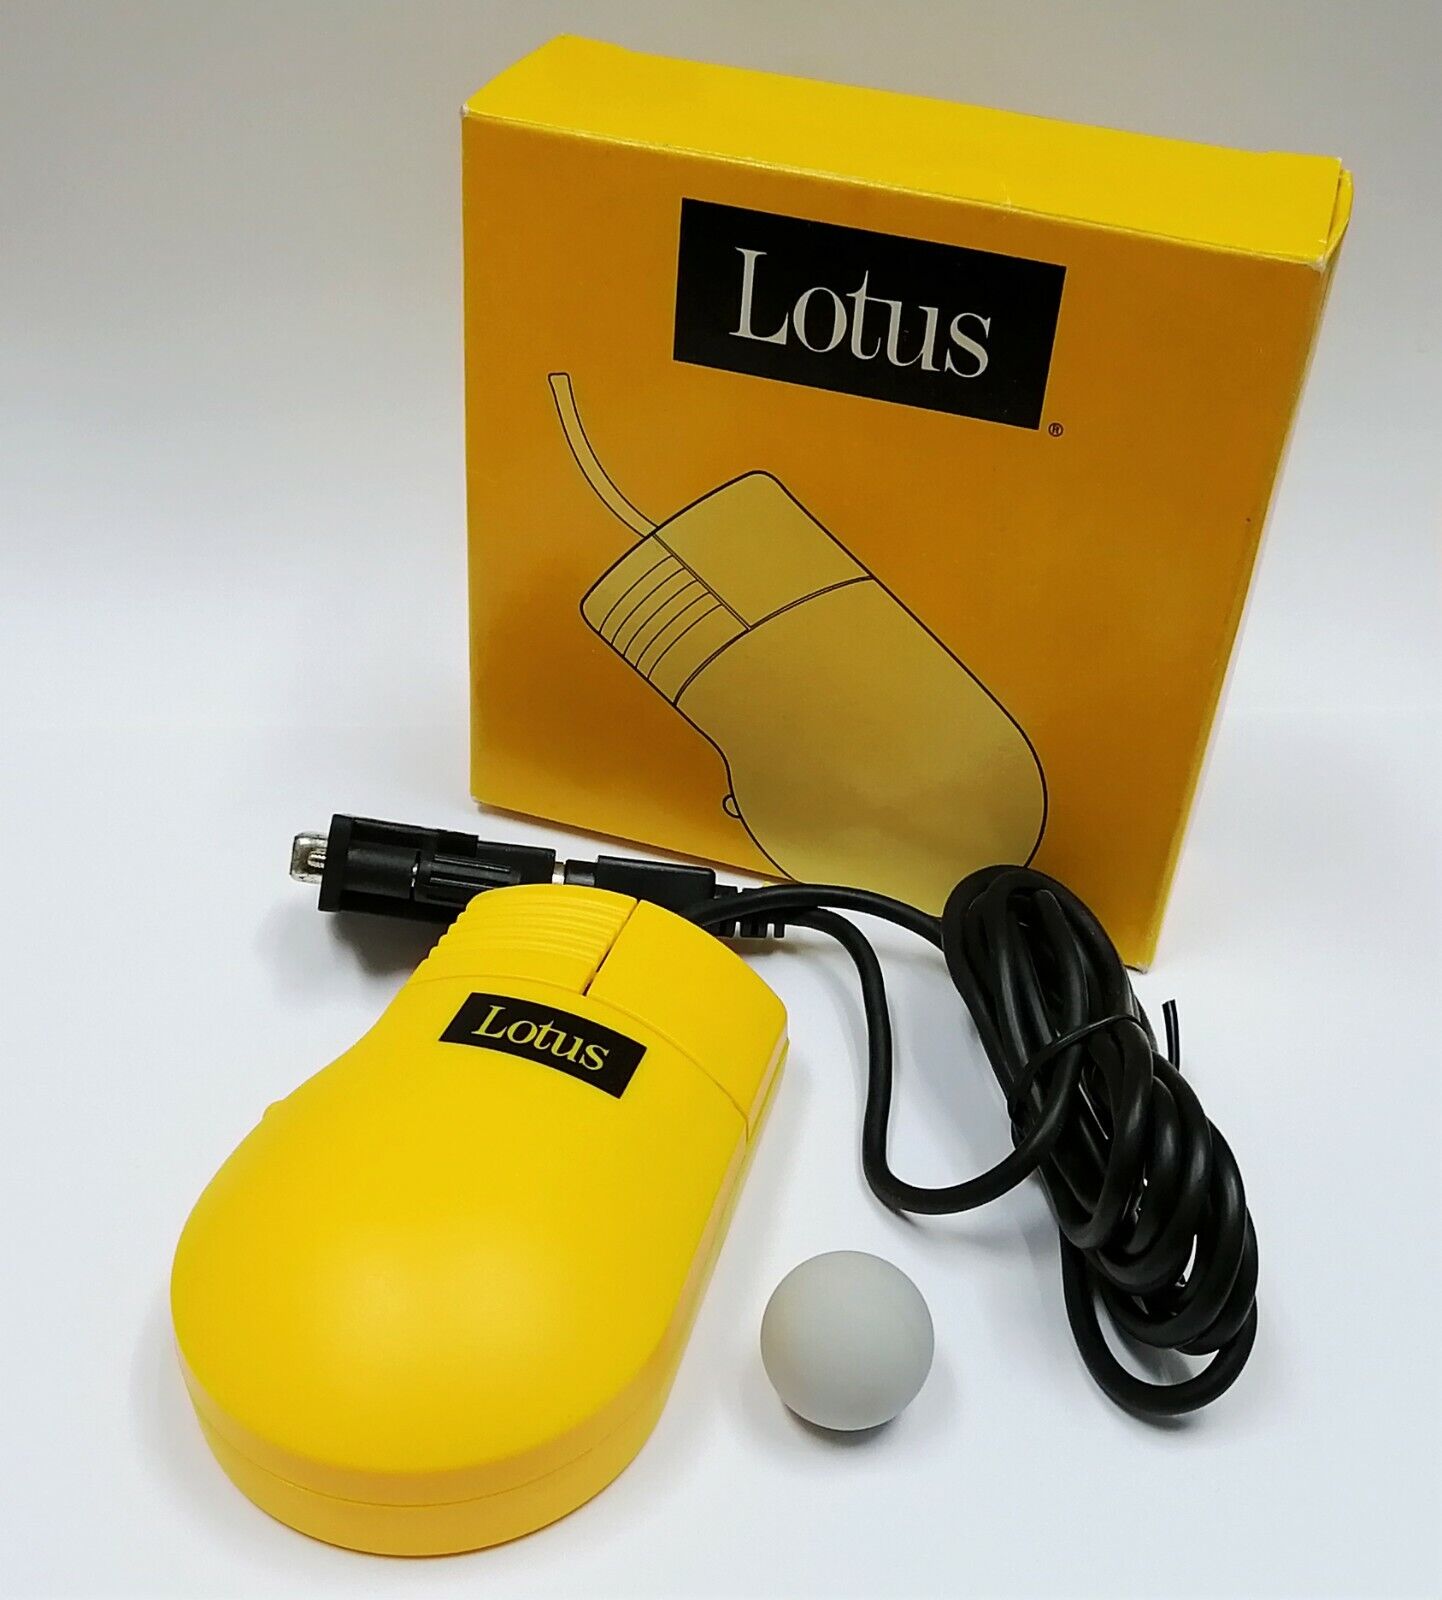 Collectible Vintage 1990s Lotus Yellow PC Mouse Very Rare Last One Available 